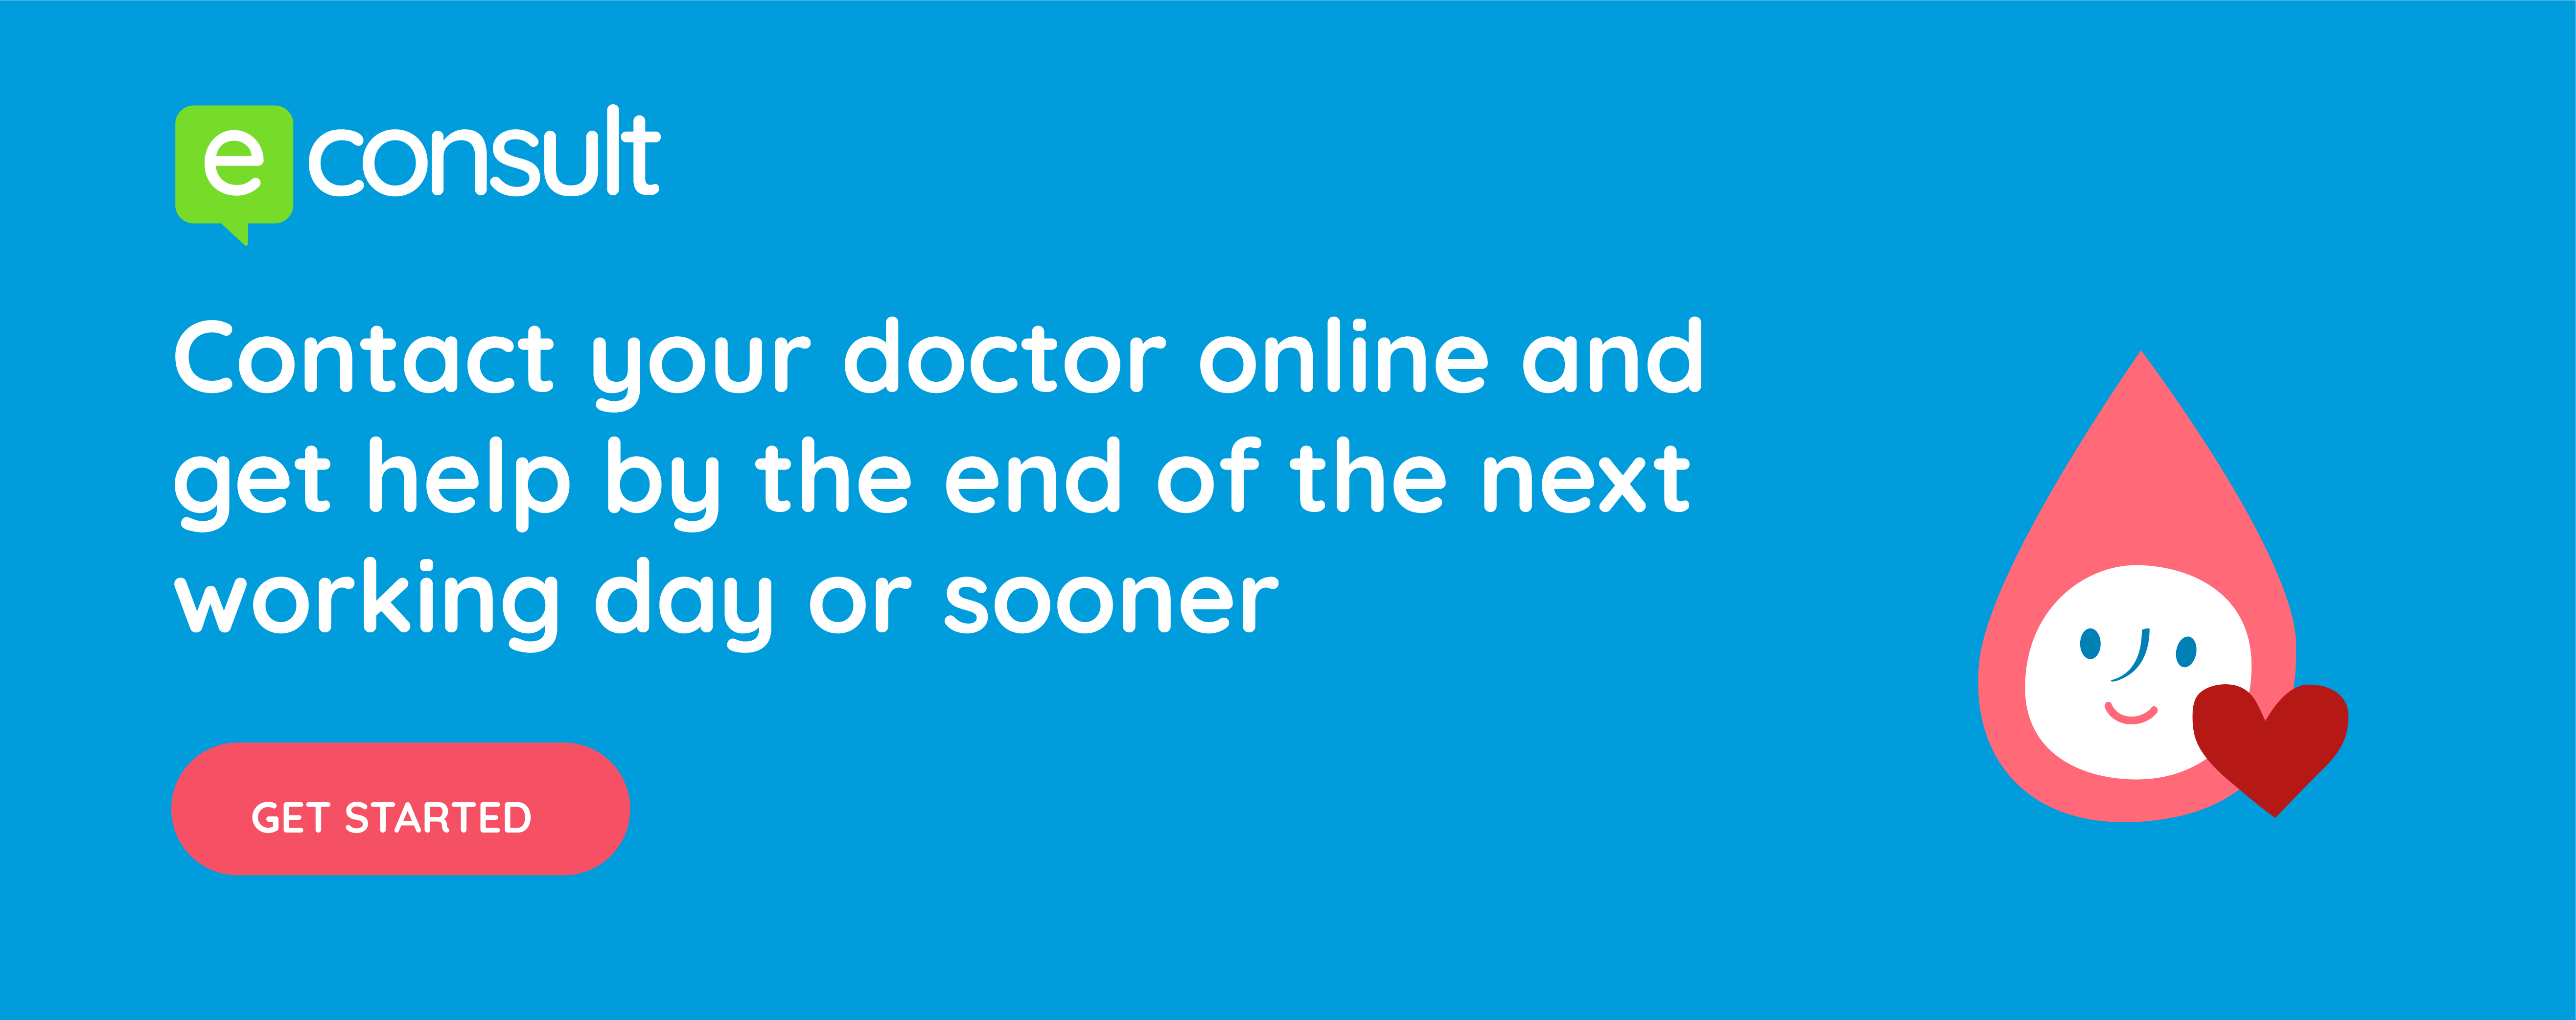 econsult. Consult your doctor online and get help by the end of the next working day or sooner. Get started